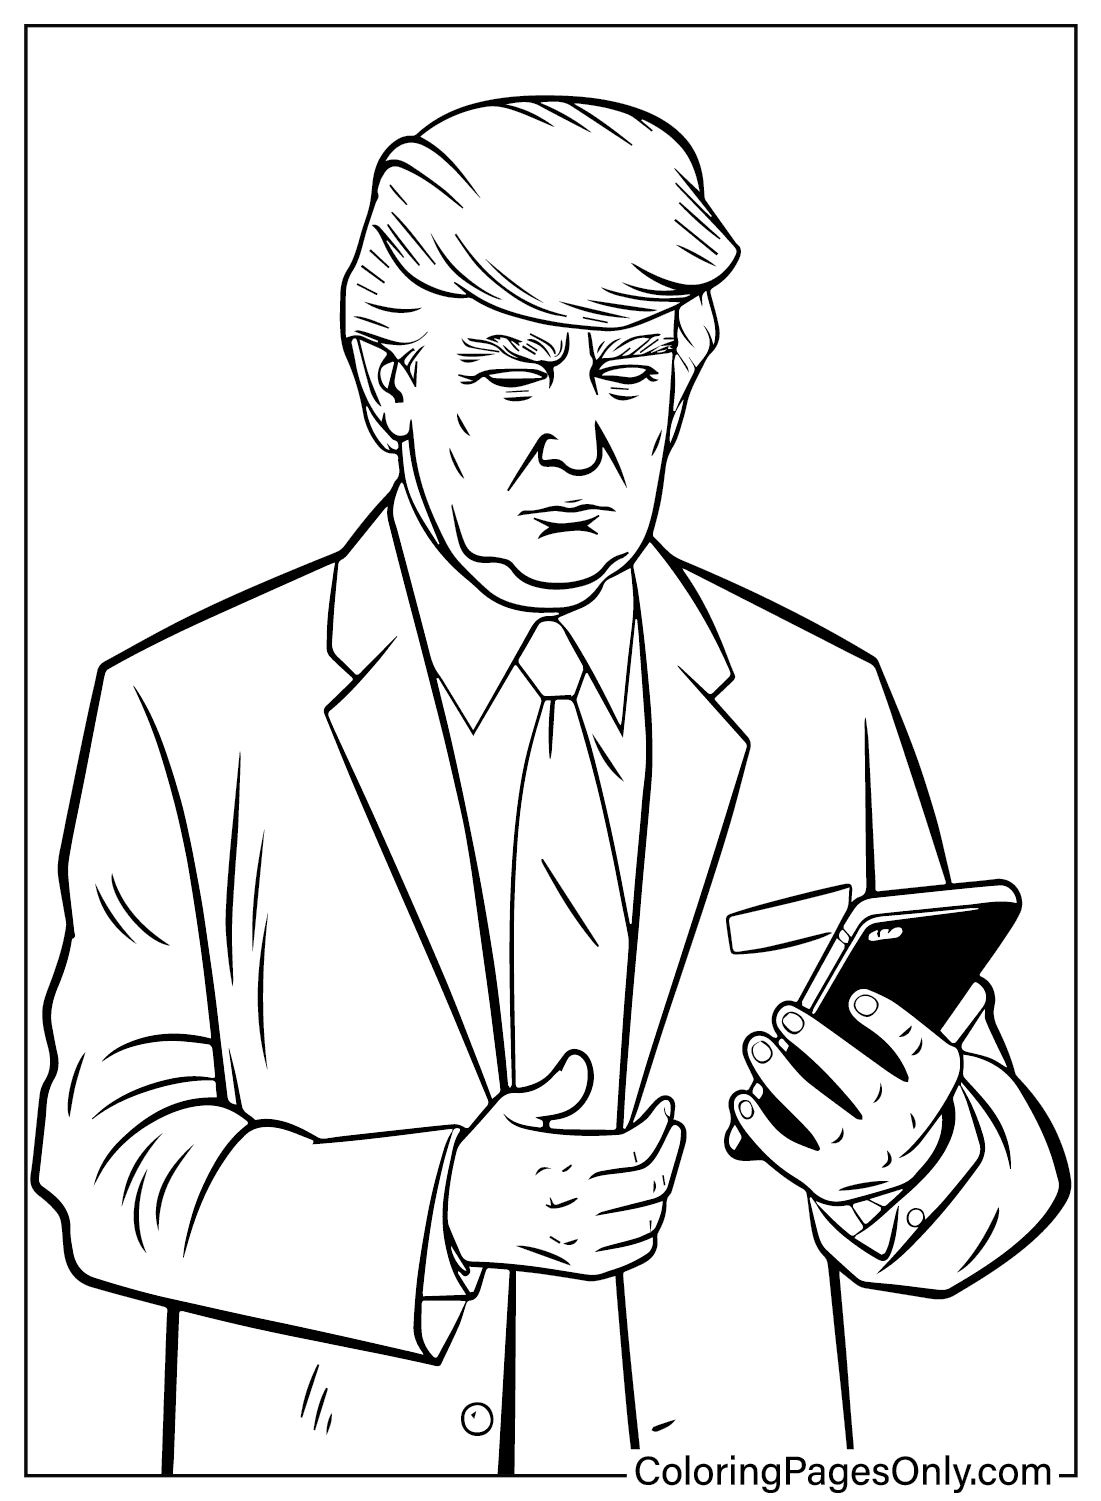 Donald Trump Coloring Page from Donald Trump